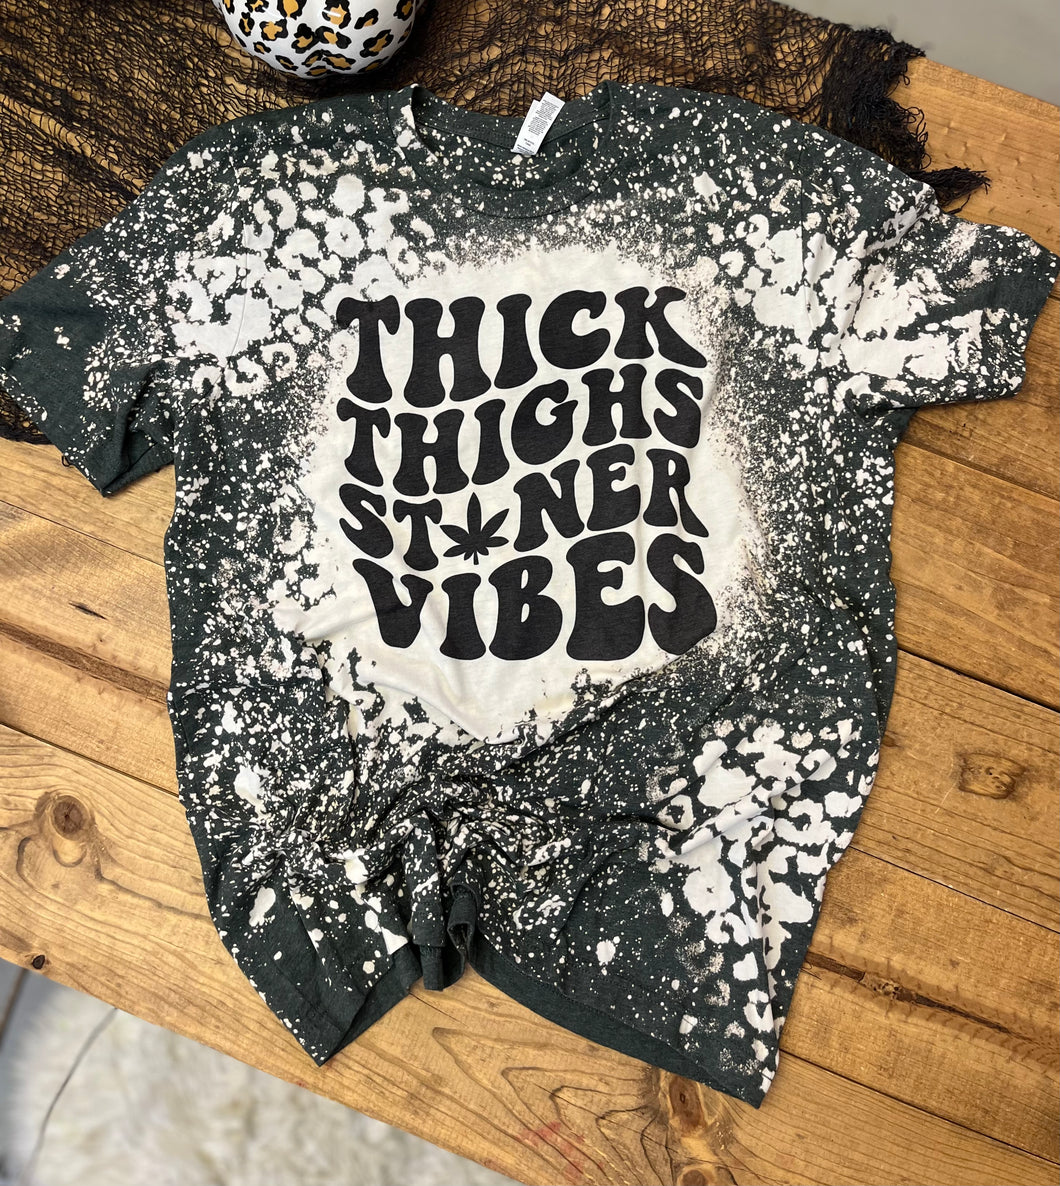 Thick thighs and Stoner vibes￼